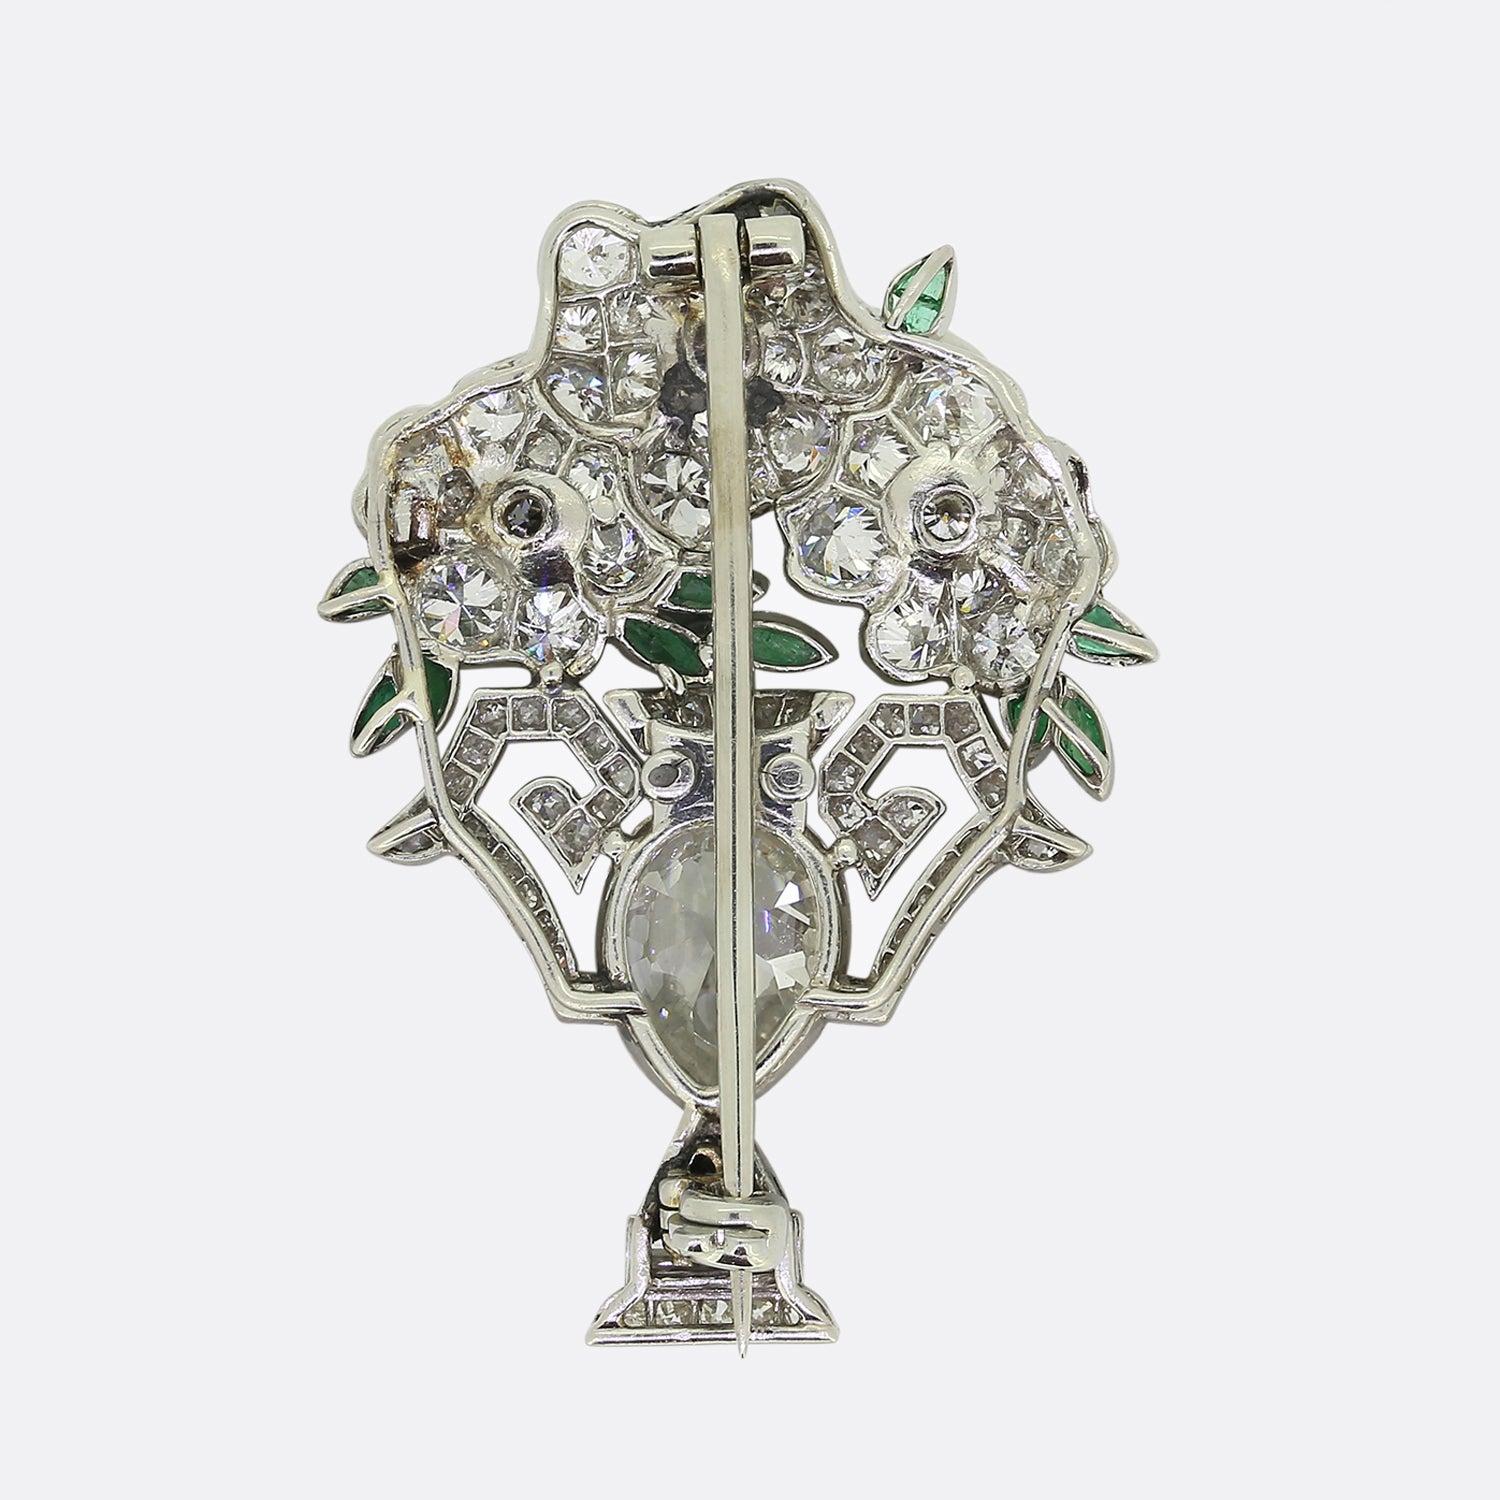 Here we have a very special flower brooch crafted at a time when the Art Deco style was at the height of design. The centre of the piece showcases an old pear cut diamond possessing a high colour and clarity. This focal stone is surrounded by single